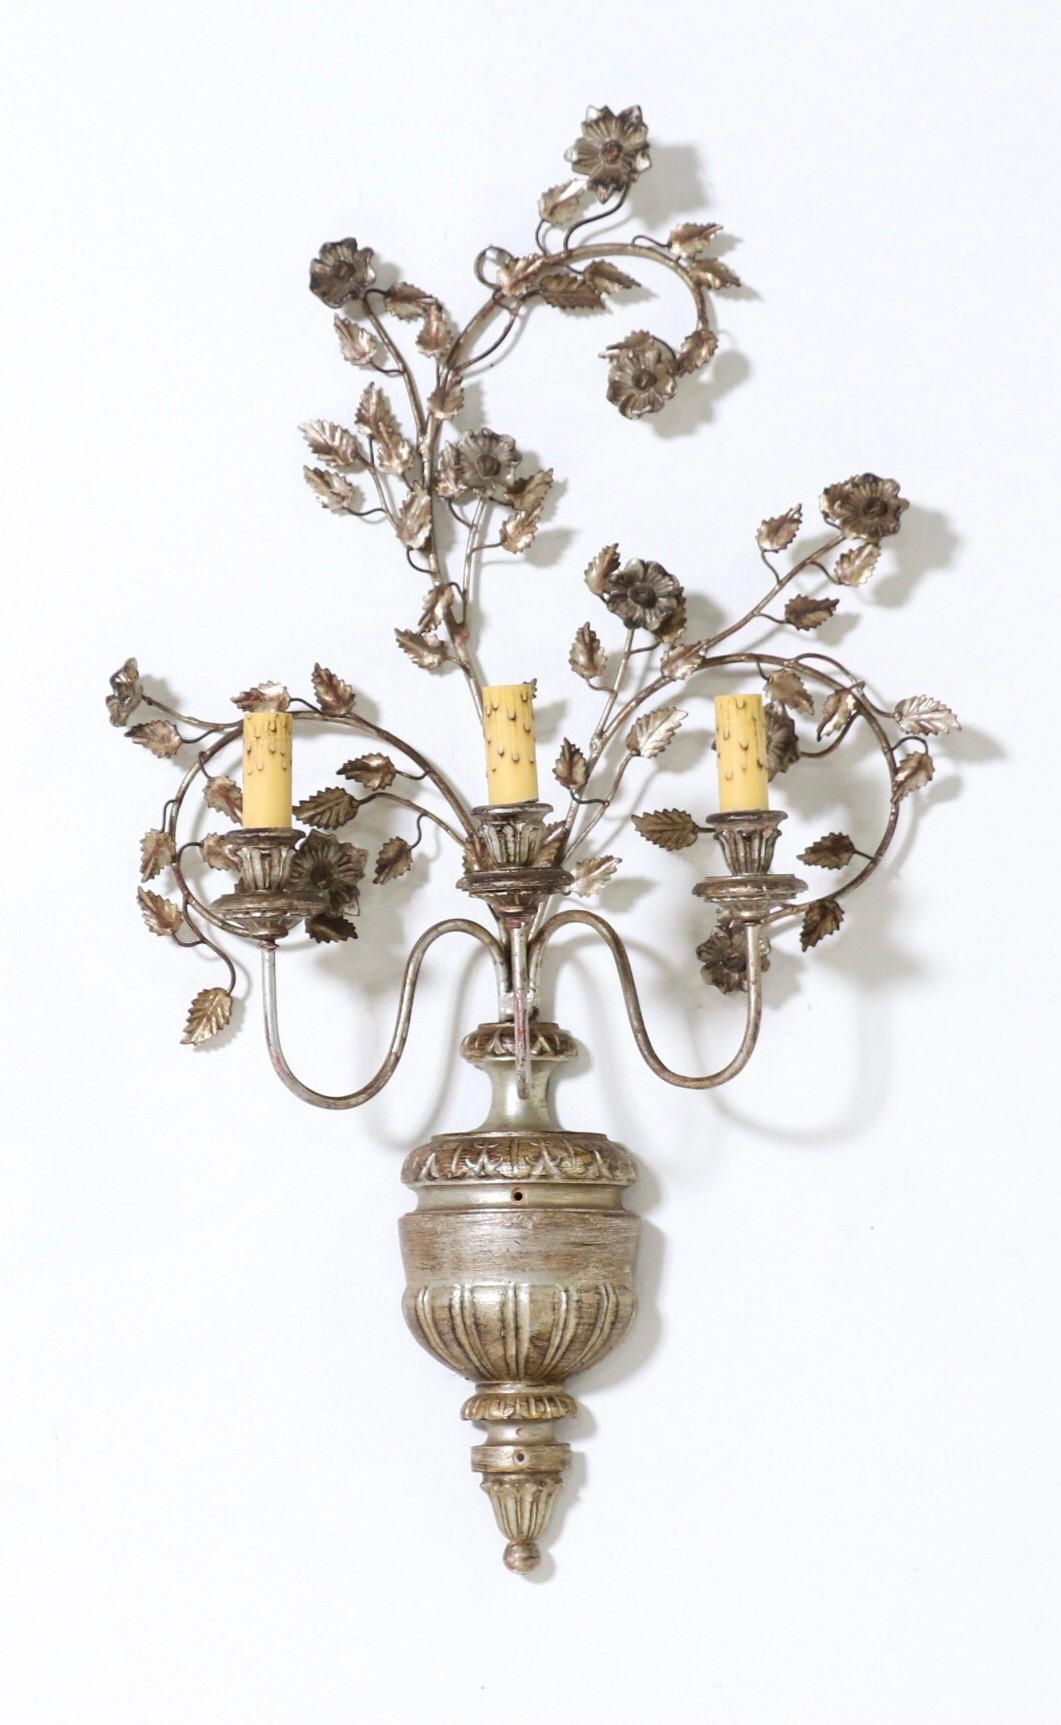 Gorgeous, Italian 1950s silvered iron and wood pair of sconces.

Each sconce consists of an urn-shaped silver-leafed wood base with a spray of iron branches and carved wood flowers. 

The sconces are wired and in working condition, they require